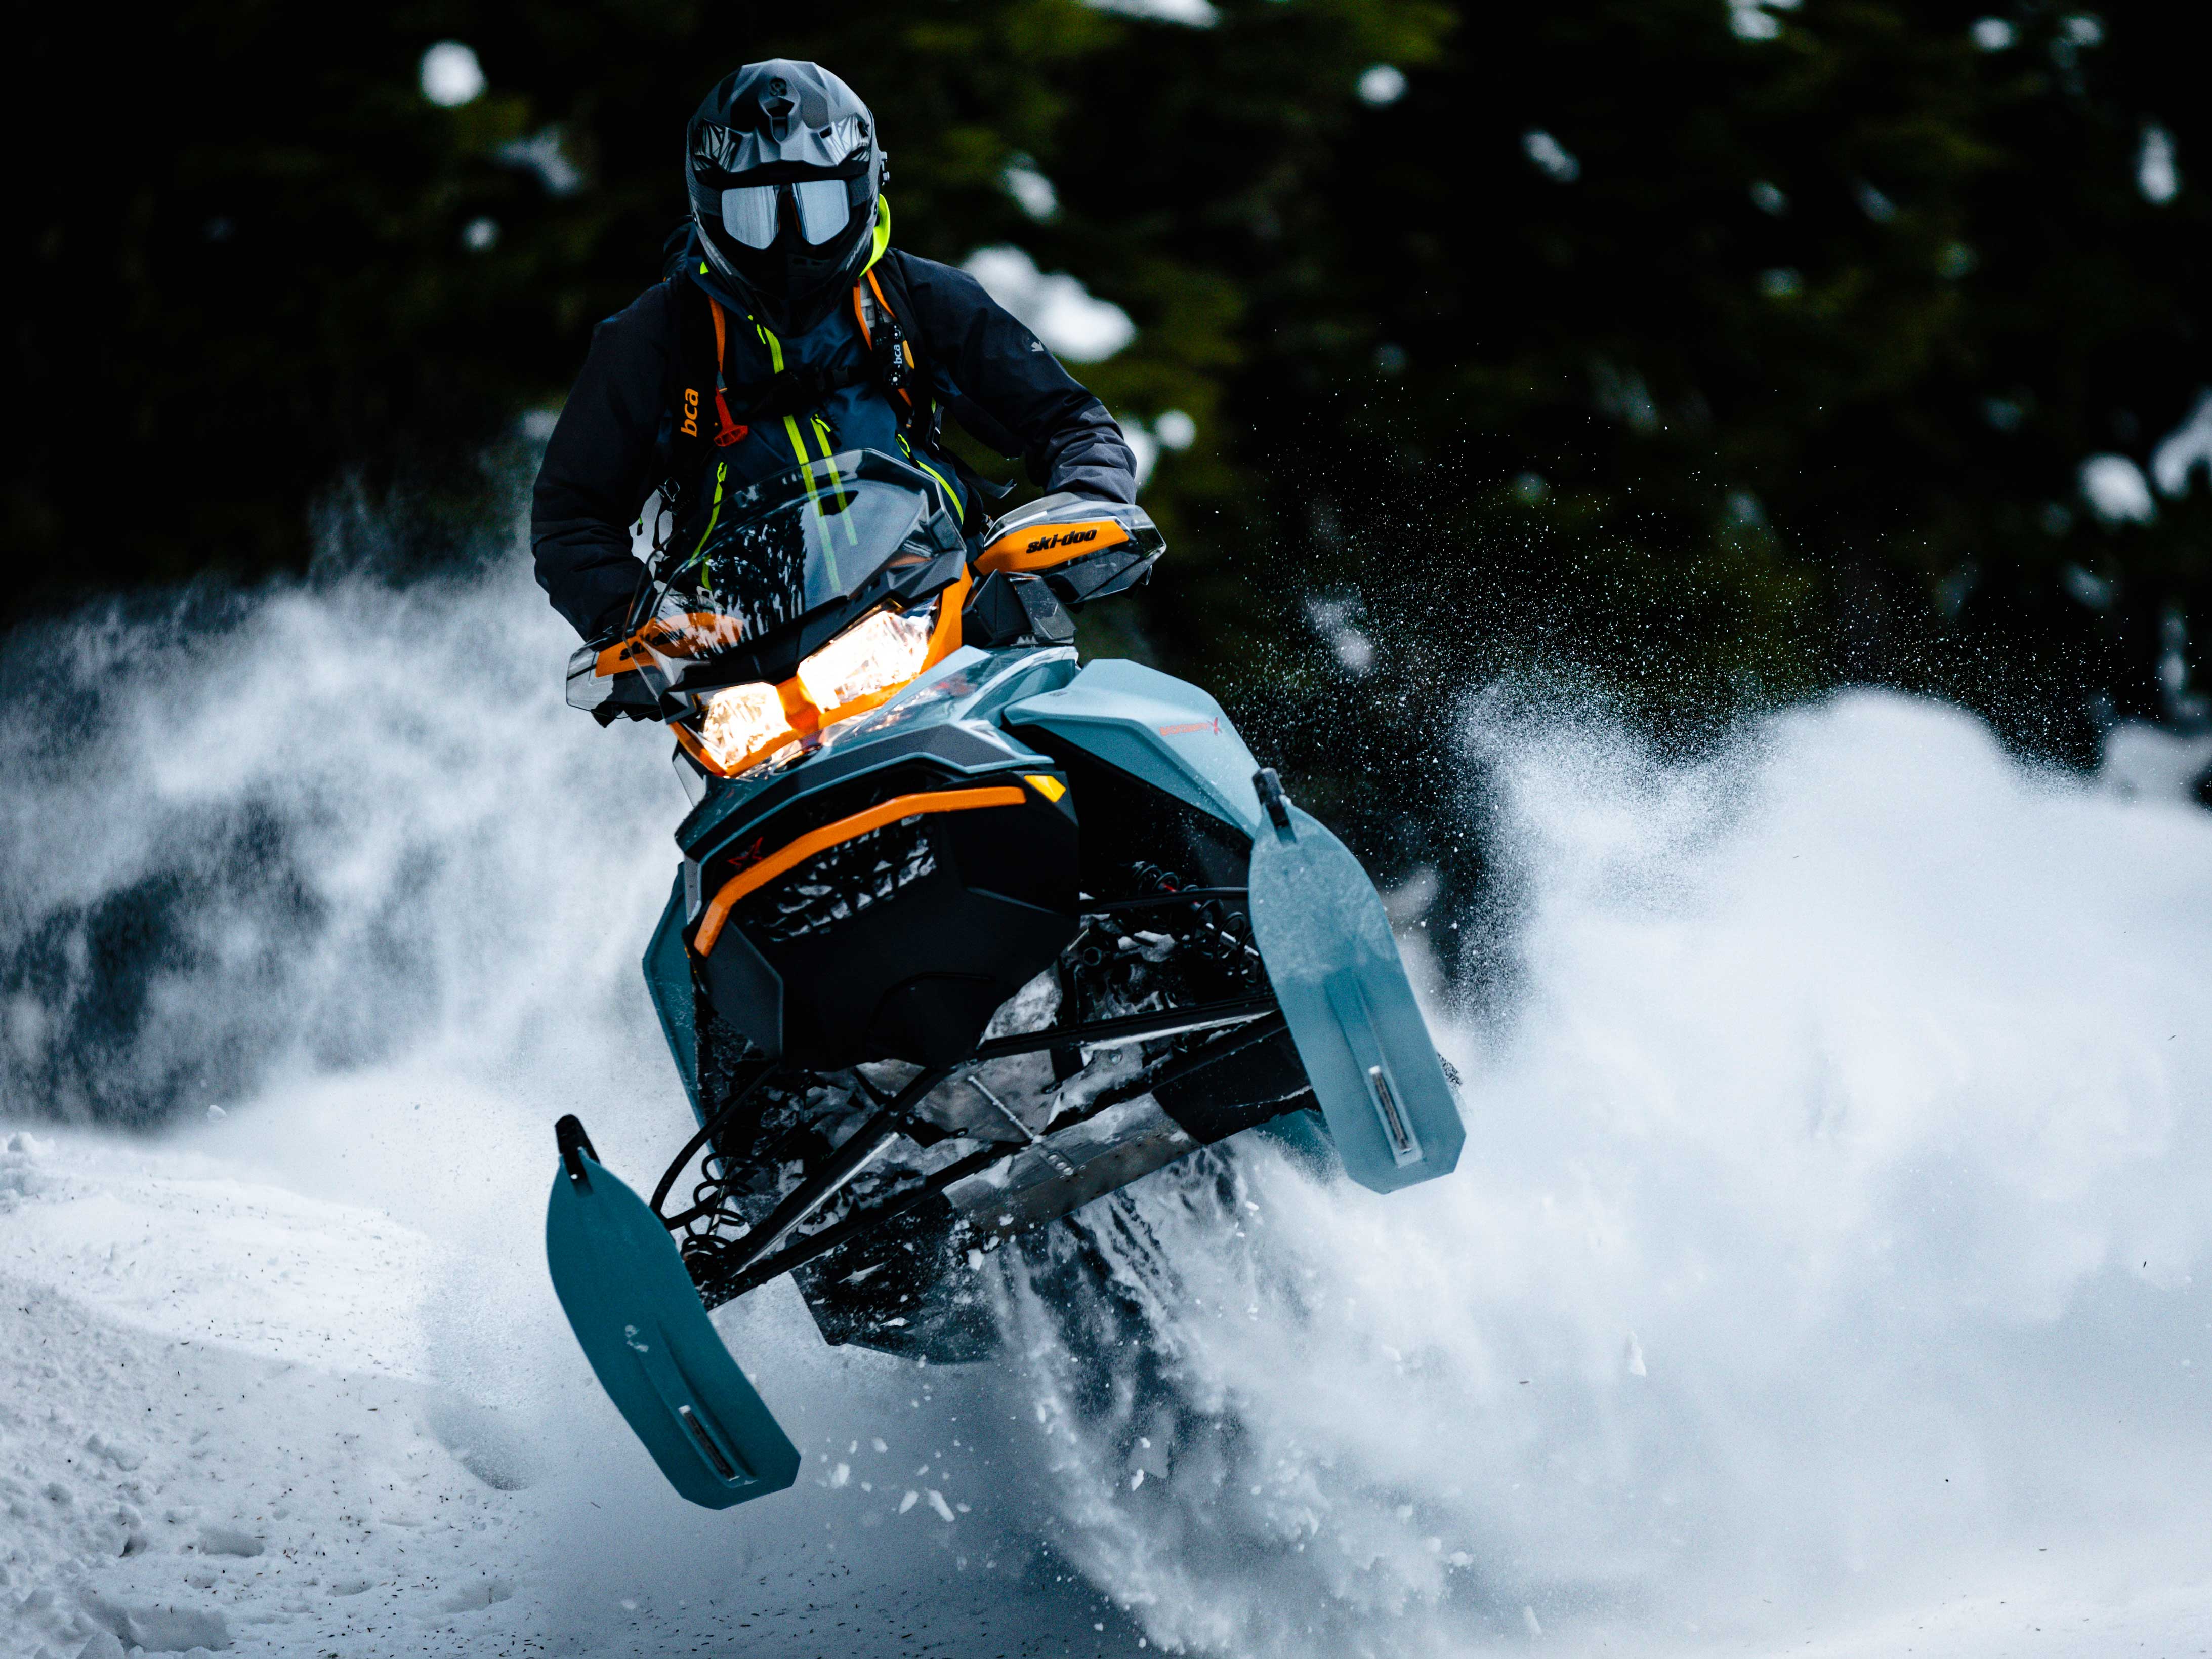 Man jumping in Powder with a 2022 Ski-Doo Backcountry